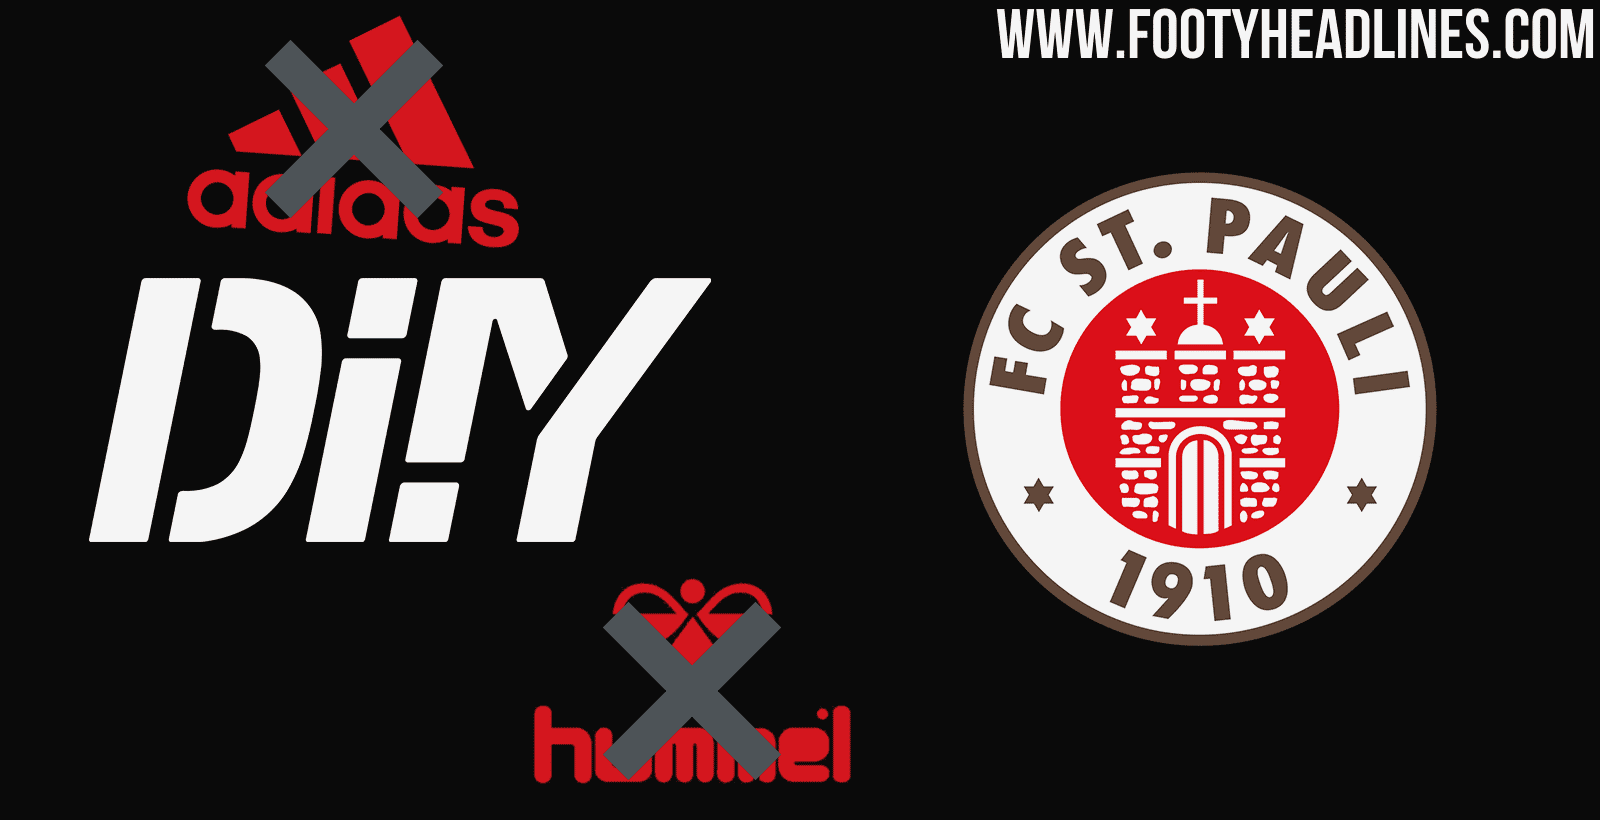 No Hummel or Co. - FC St. Pauli Launches Own Brand, To Make 21-22 Kits In-House - Footy Headlines